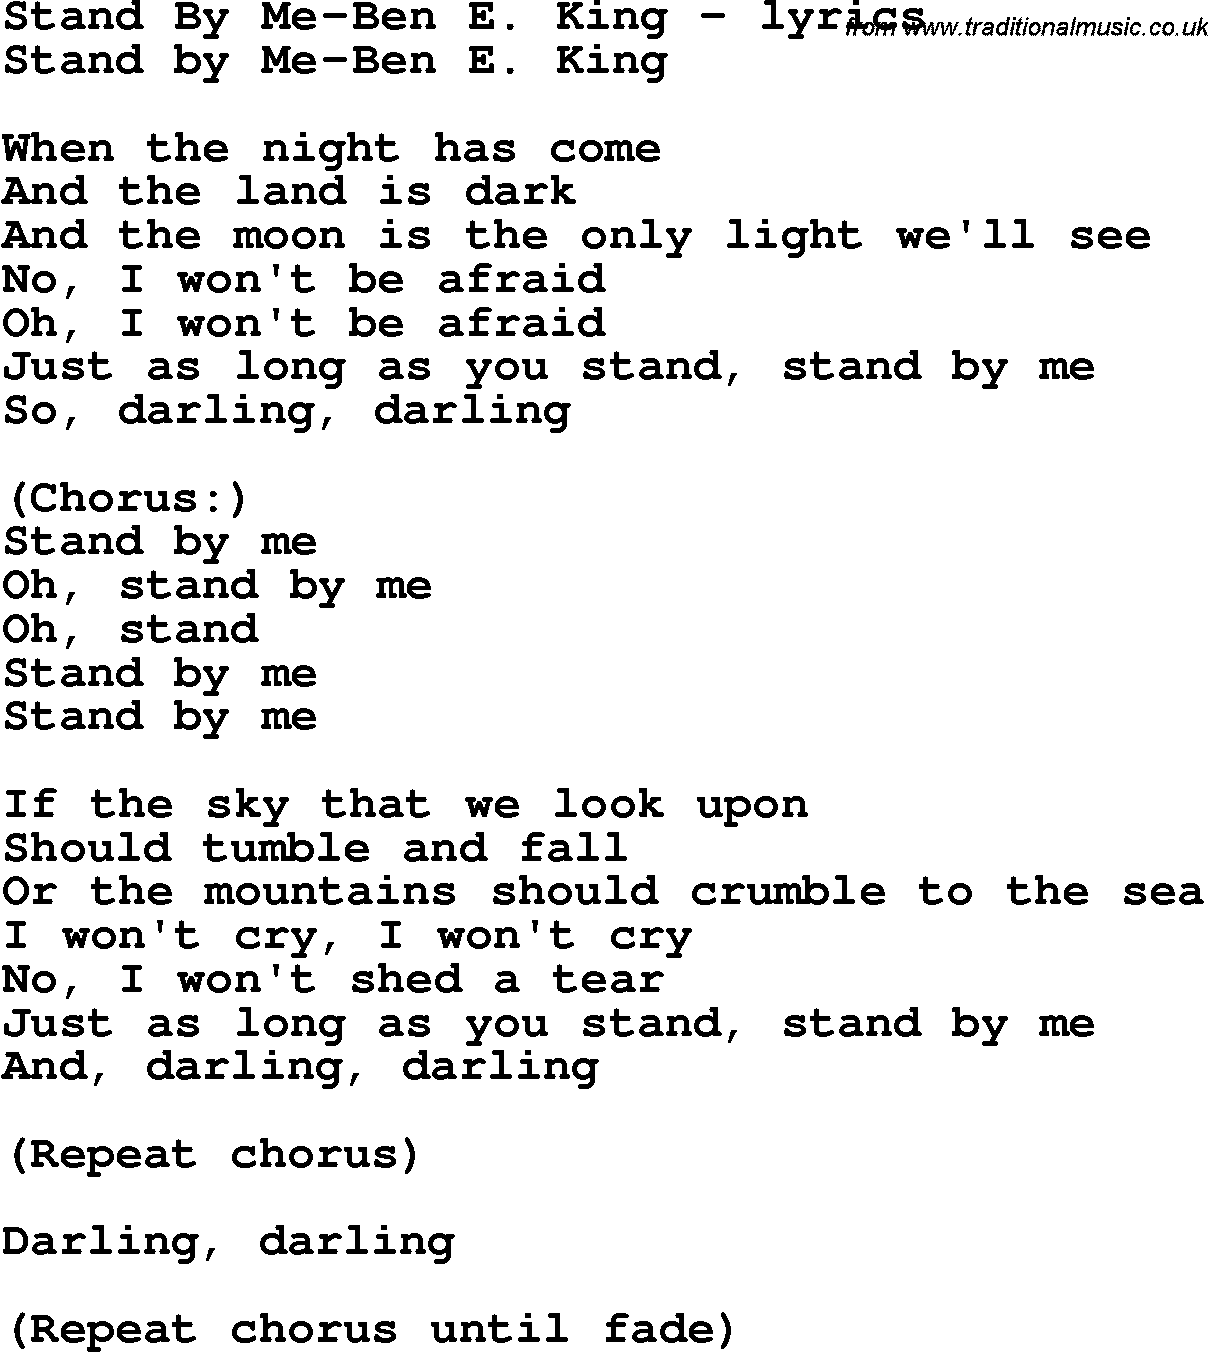 Lyrics for Stand By Me by Ben E. King - Songfacts